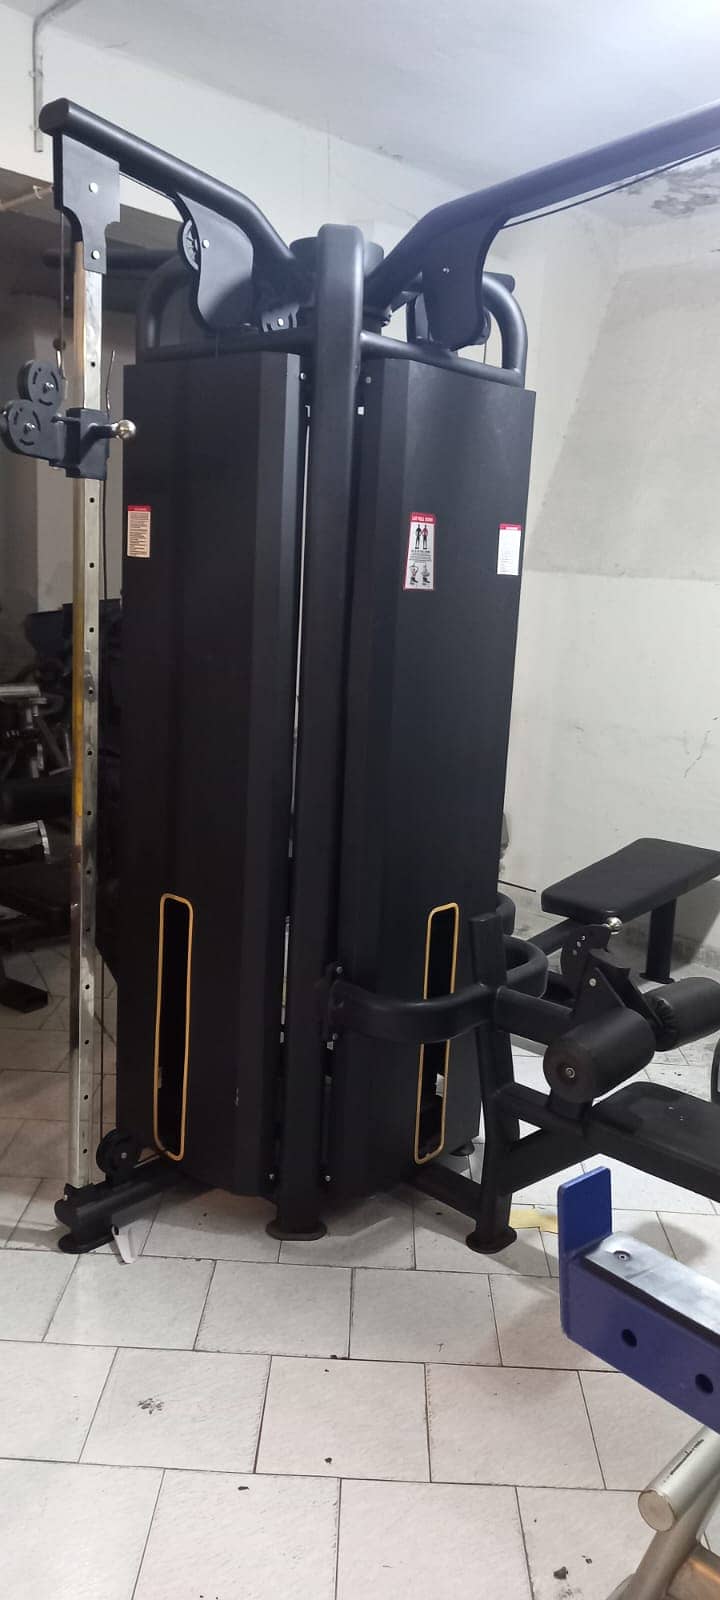 FULL Exercise GYM SETUP FORE SALE ( ASIA FITNESS) Strength, Cardio 5